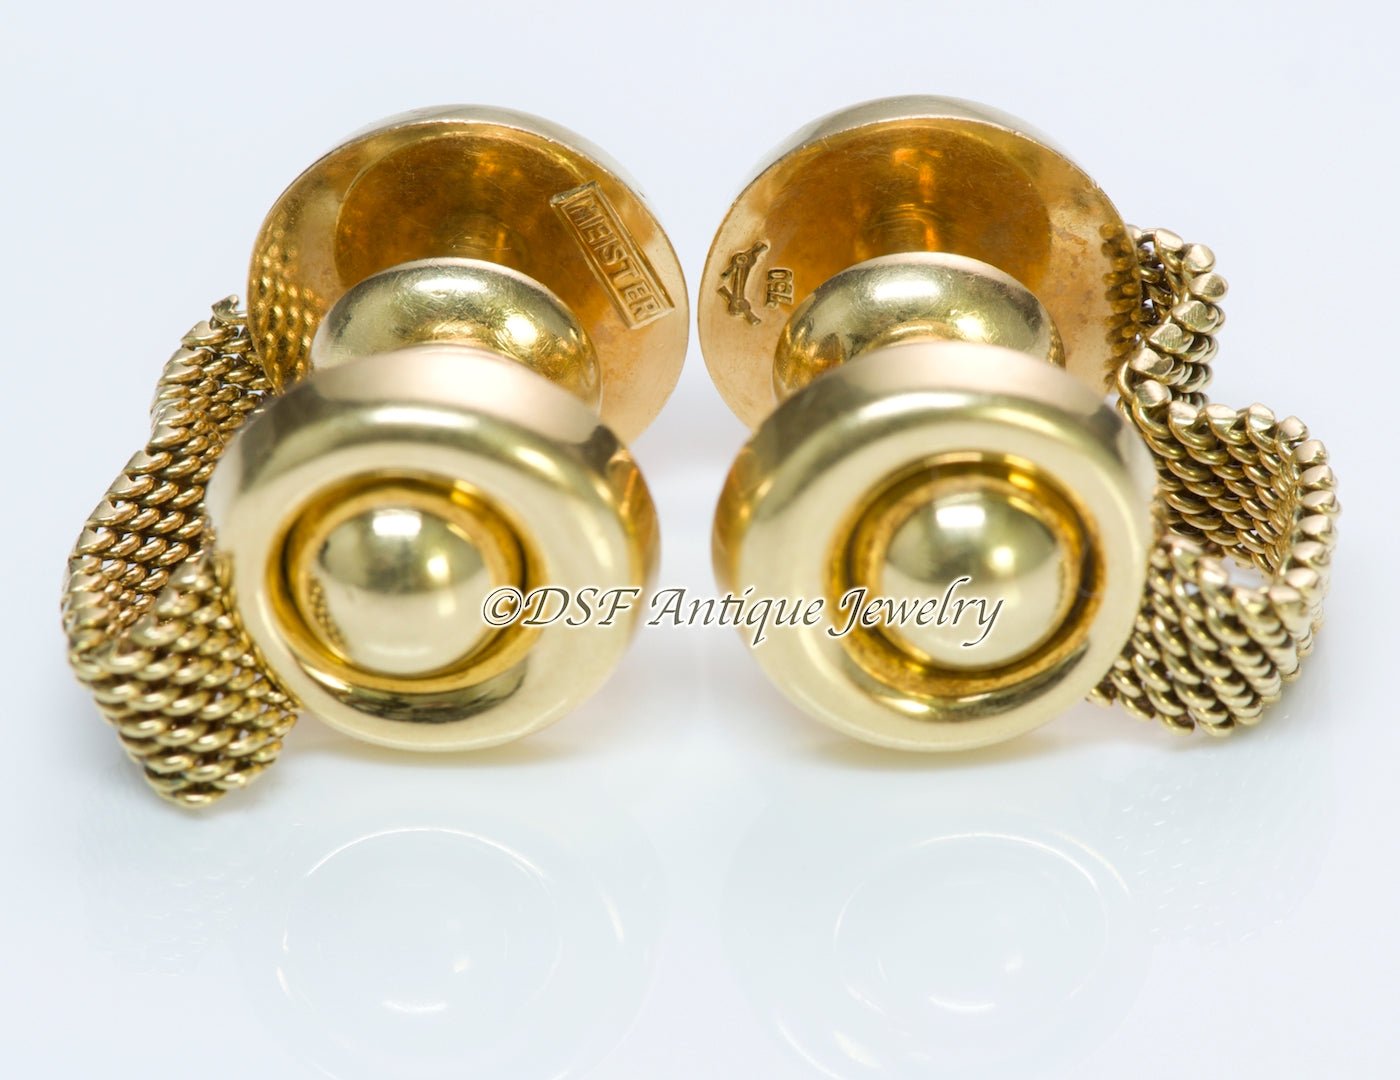 Emil Meister Gold Cufflinks - DSF Antique Jewelry